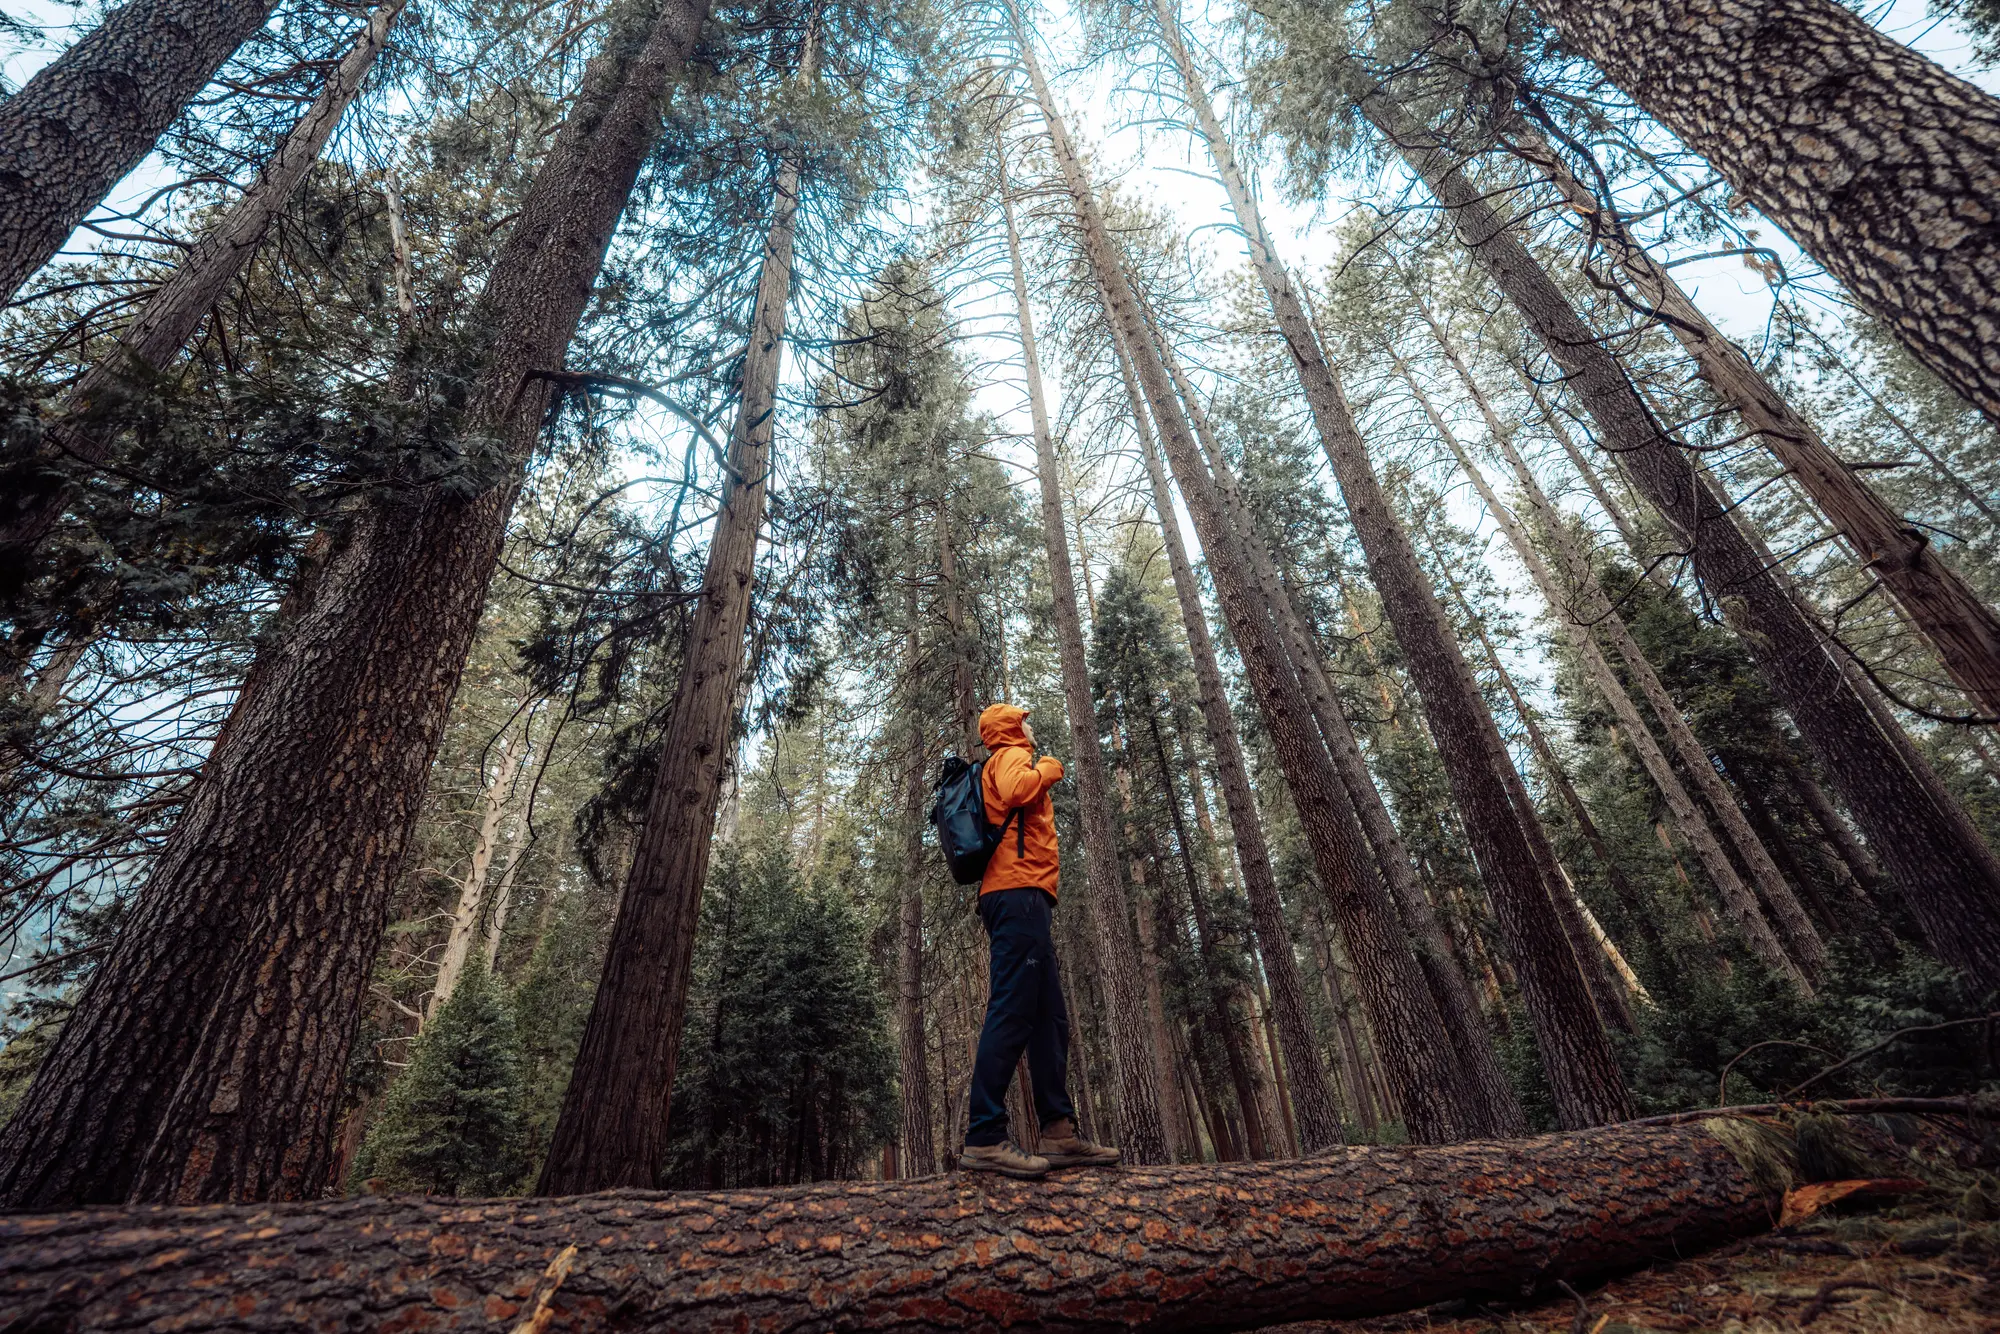 Image of a hiker in the forest, Image courtesy of Kane C. Andrade. 